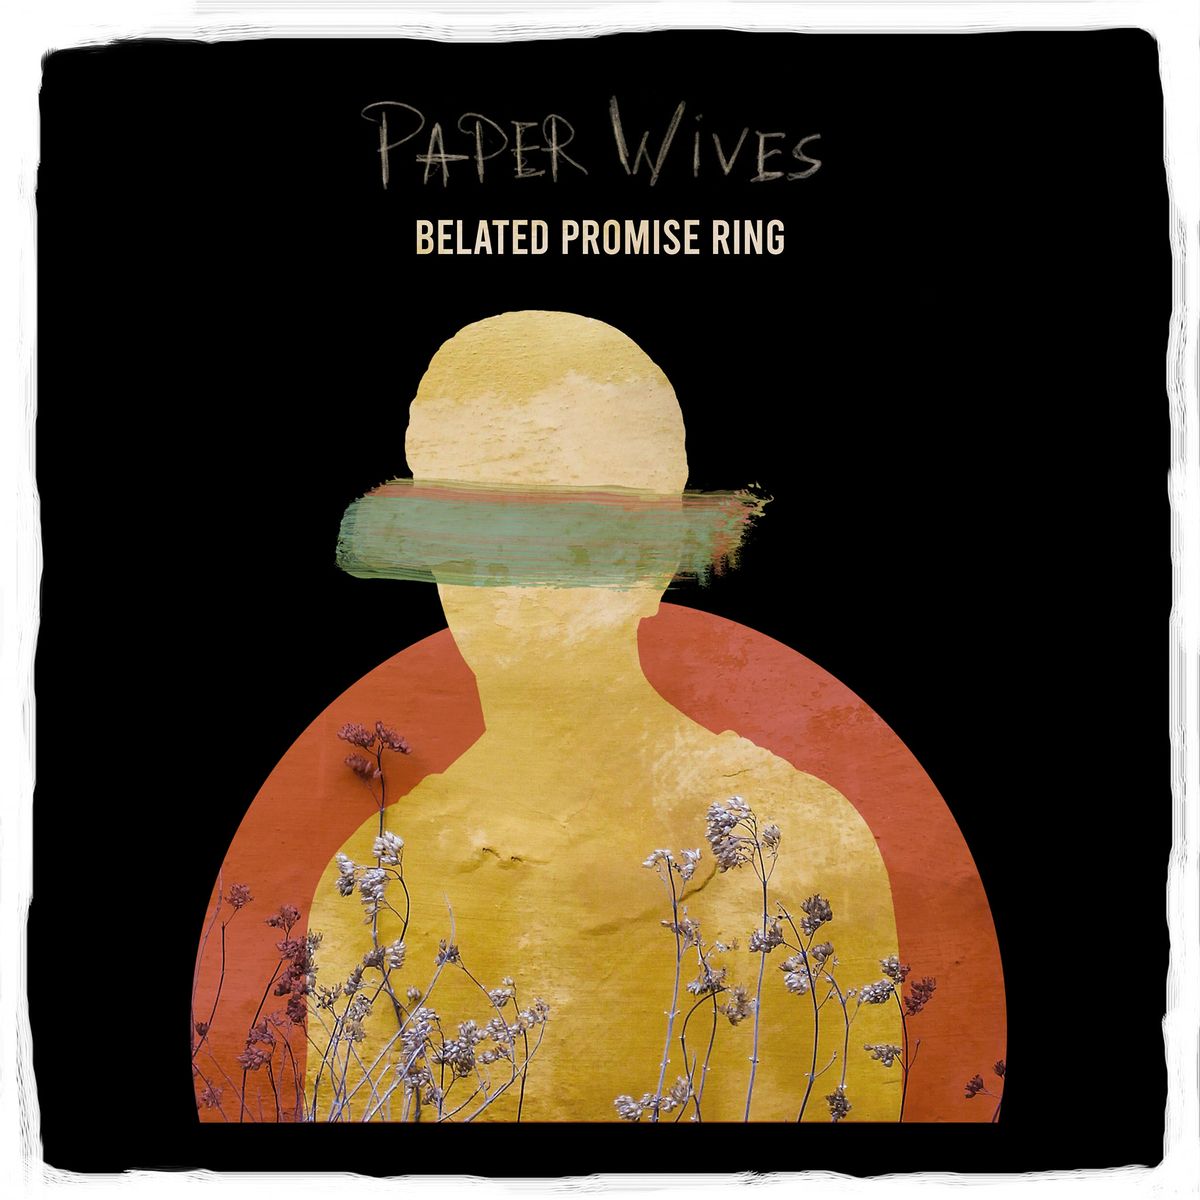 Belated Promise Ring - 'Paper Wives'